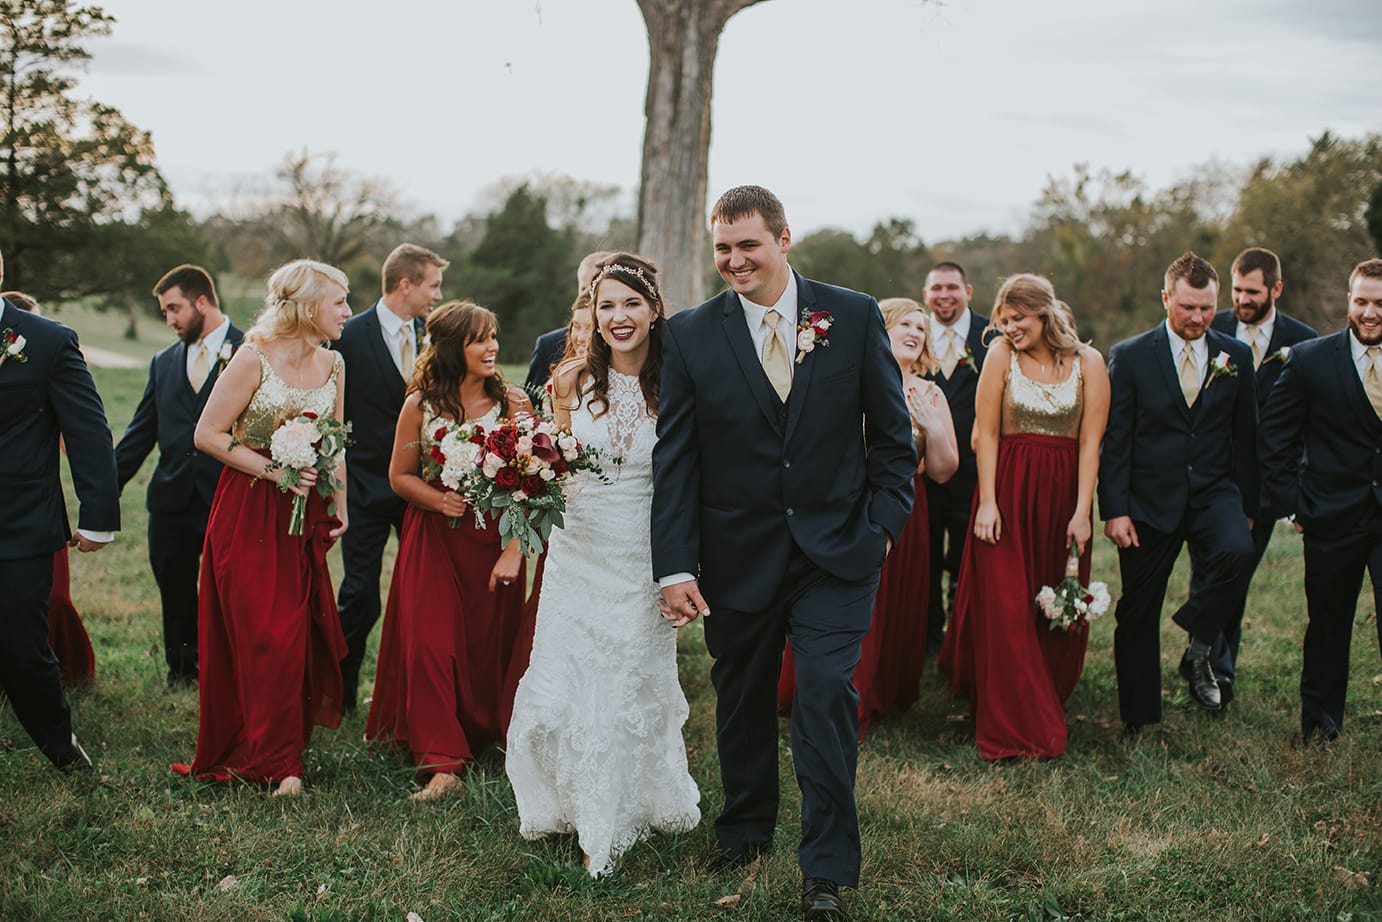 Fall Wedding with Retro-Modern Details - Love Maggie